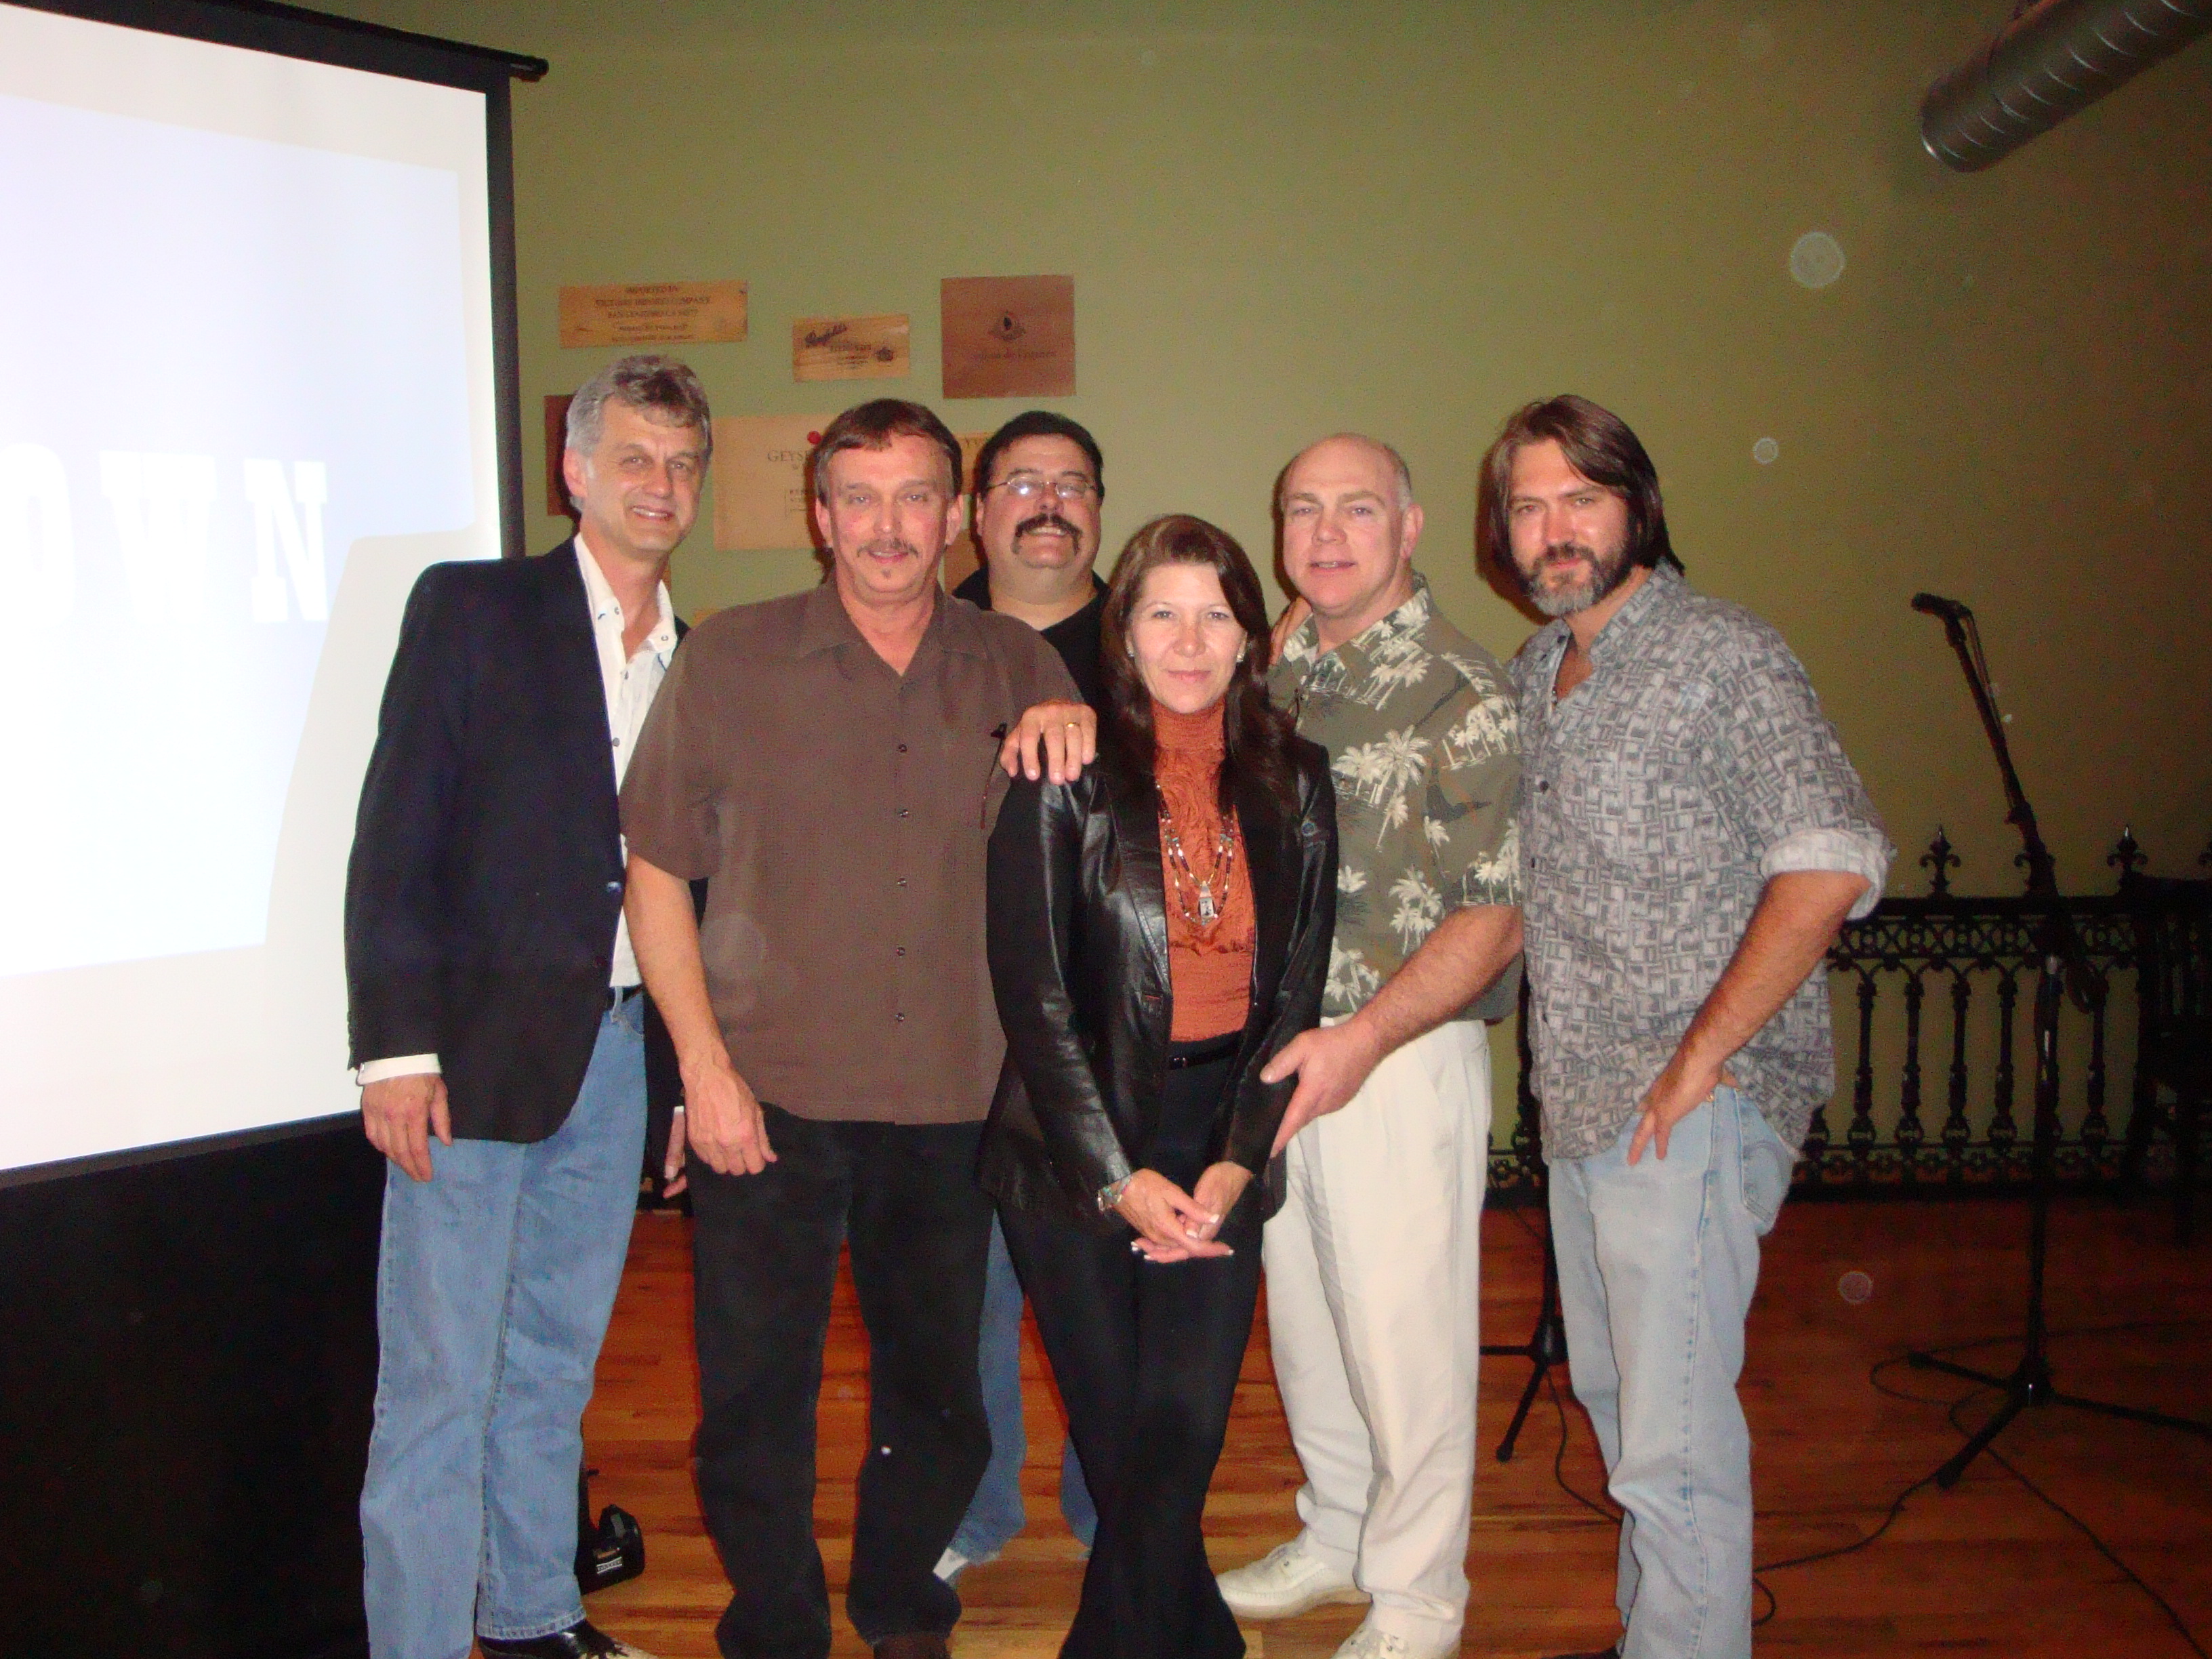 At a screening of Dean Teaster's Ghost Town in Michigan are, from left Director Dean Teaster, actor-producer Anthony Hornus, Gary Kovacs, Tammy Stephens-Teaster, Dave Papenfuss and actor-producer DJ Perry.